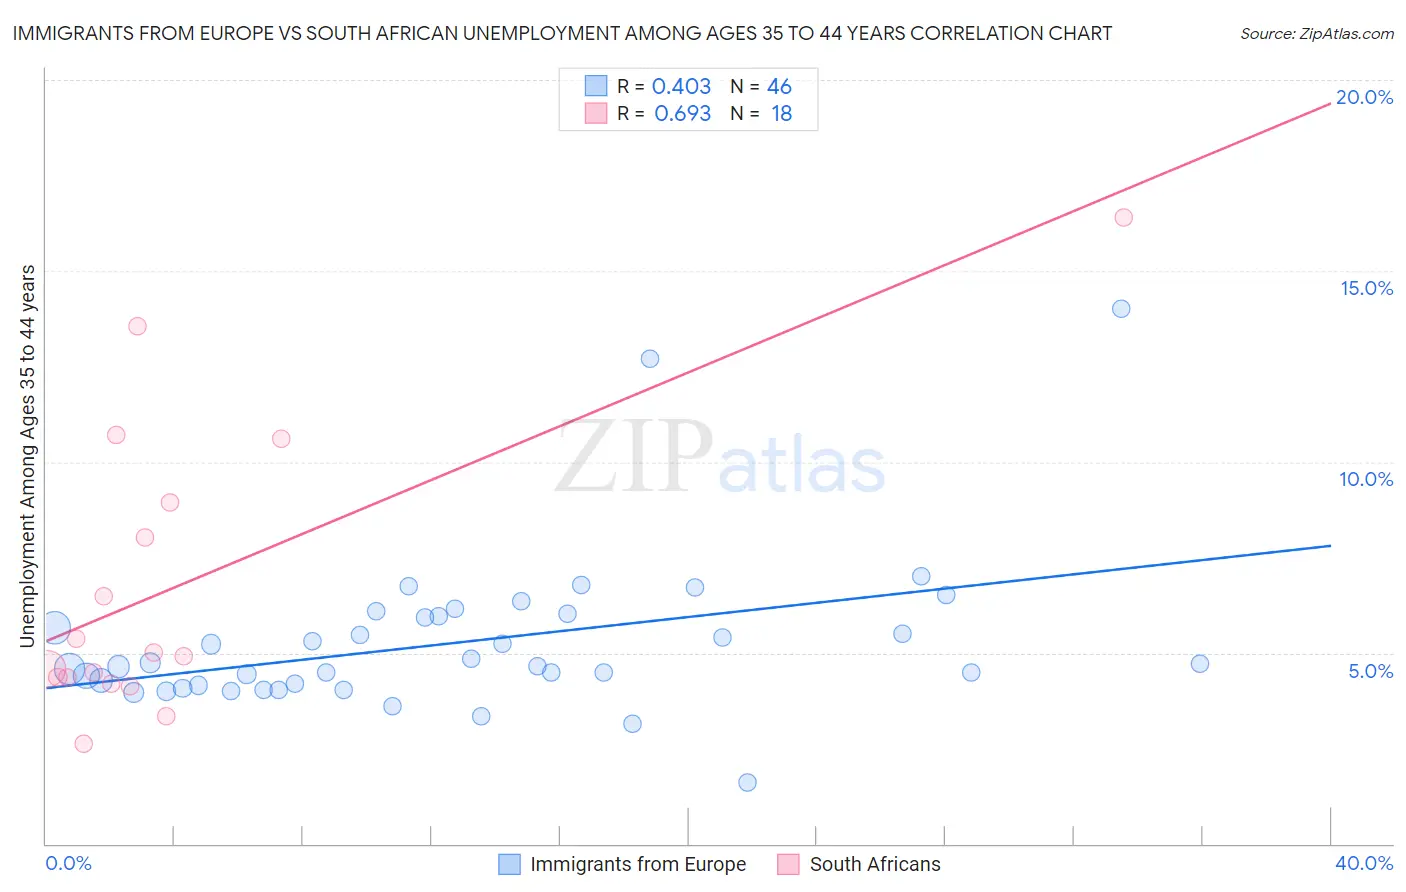 Immigrants from Europe vs South African Unemployment Among Ages 35 to 44 years